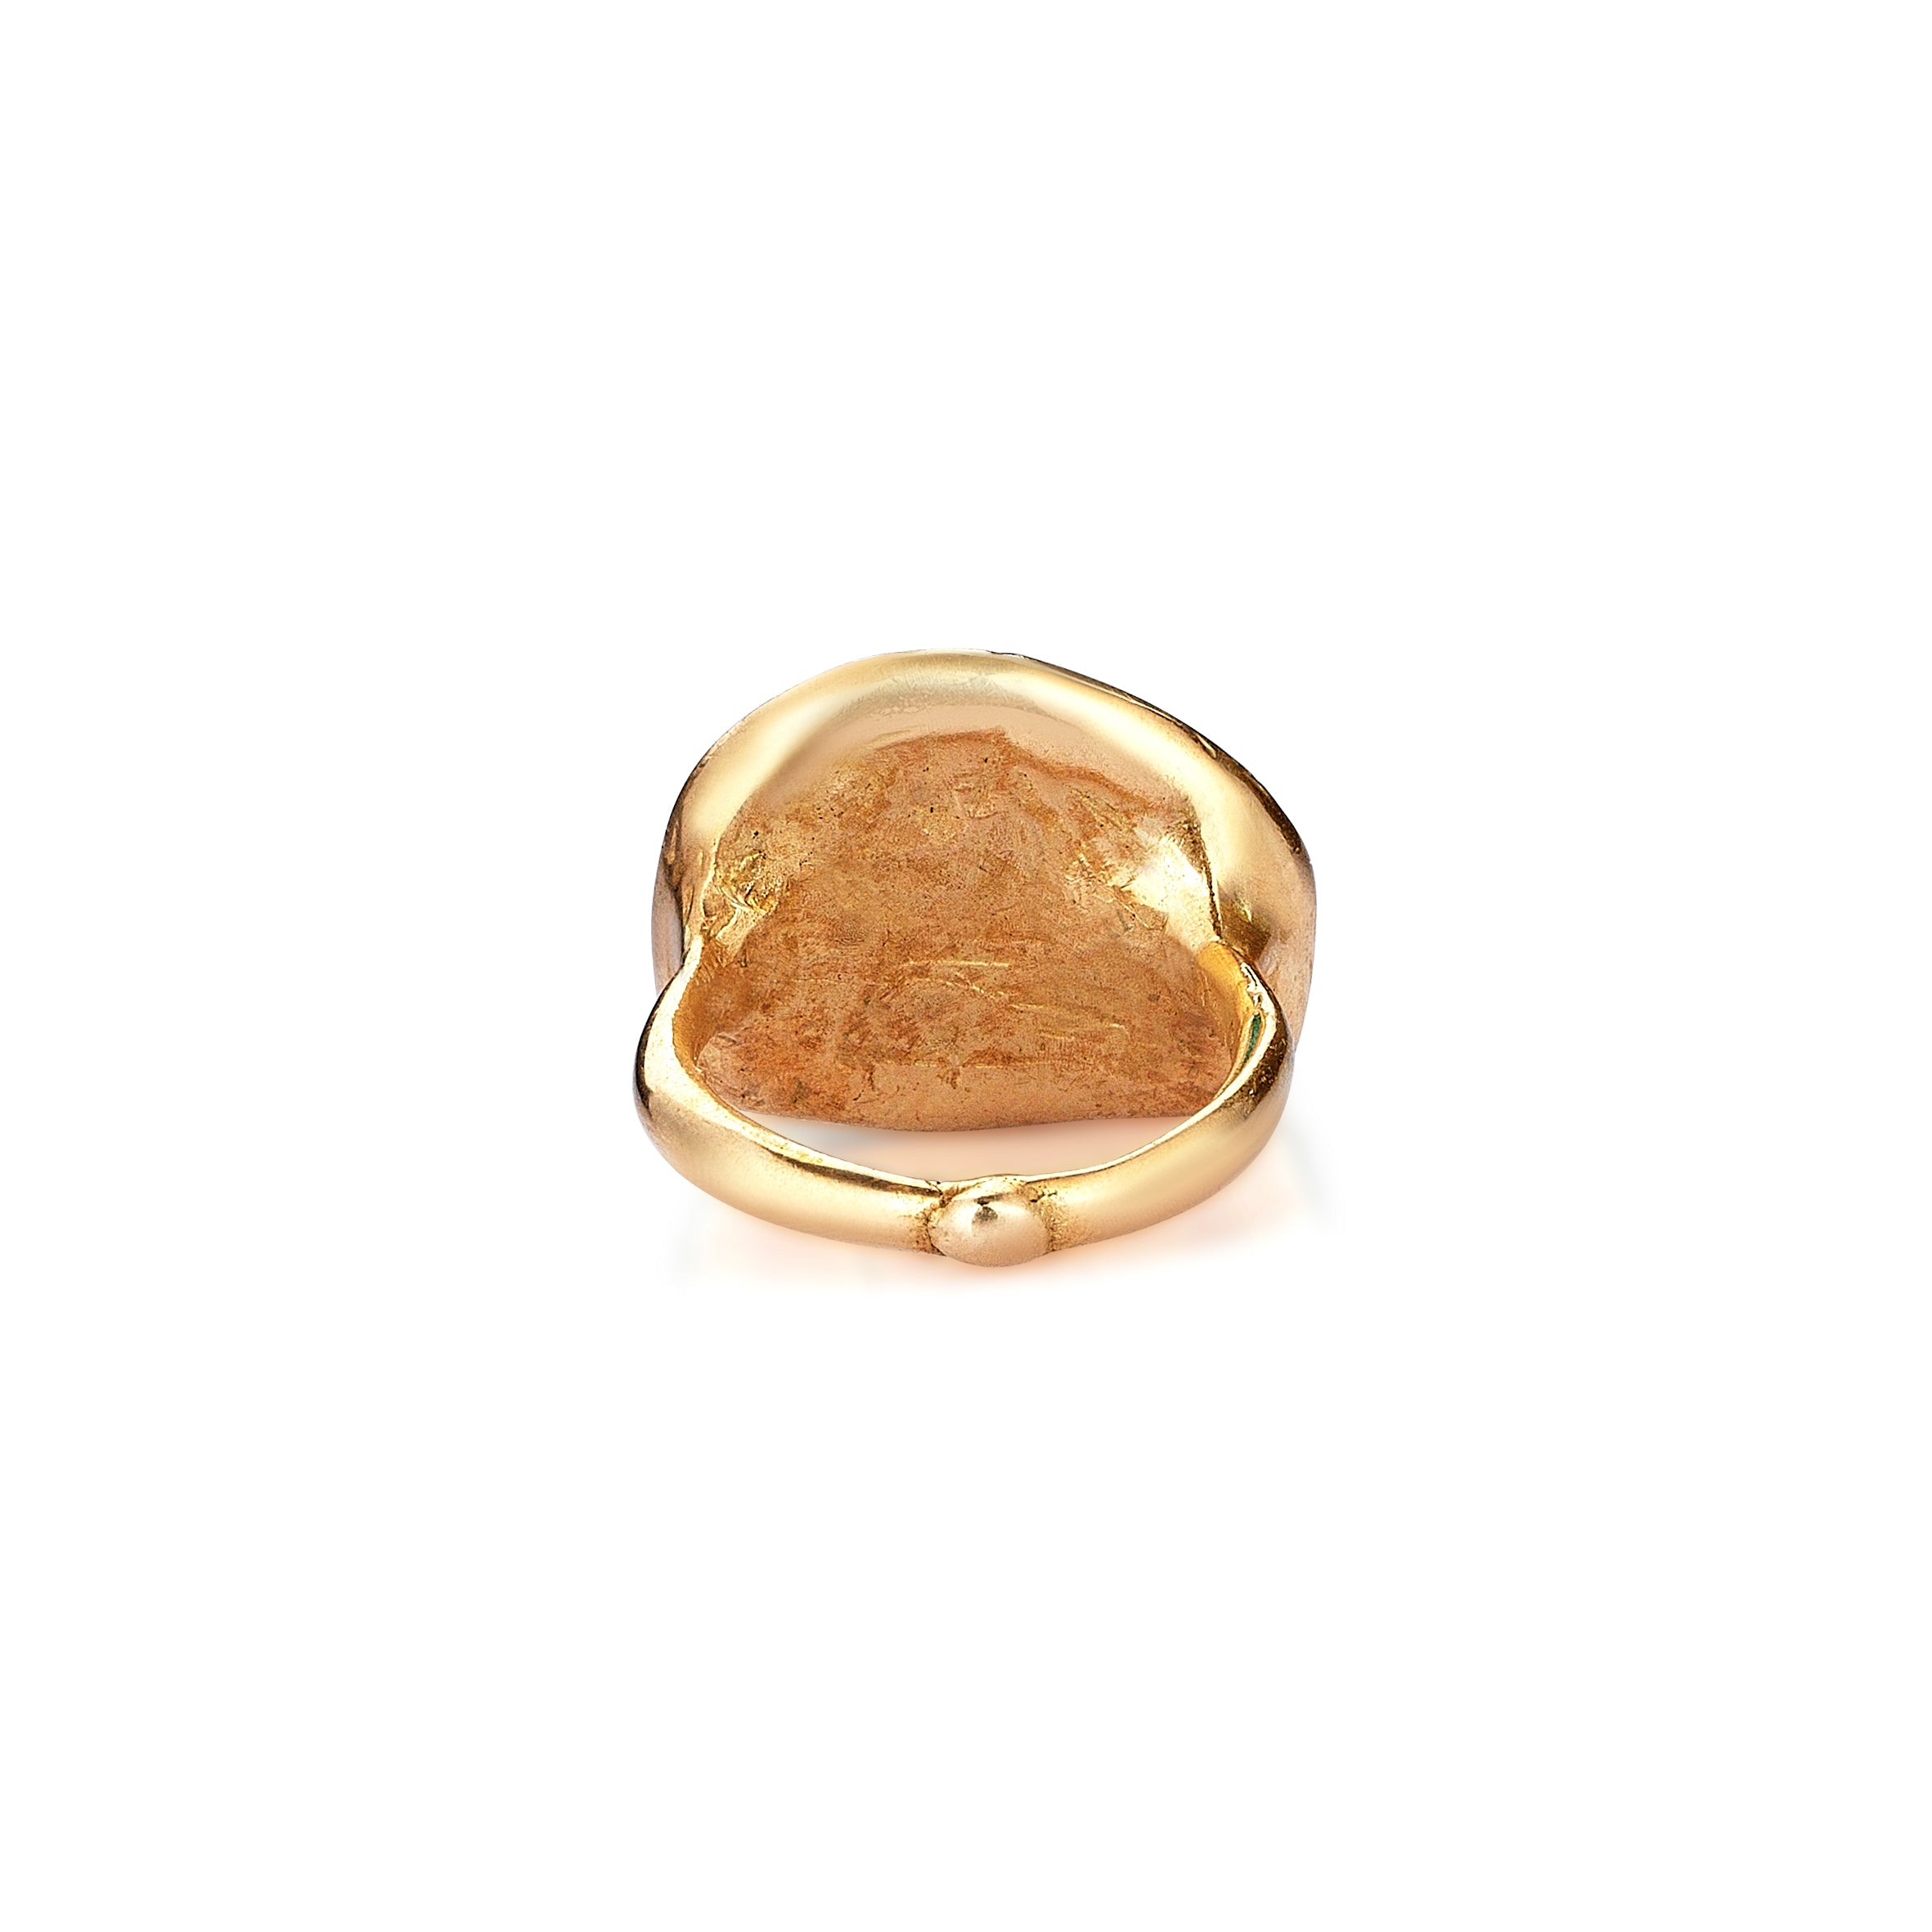 The Cyprus Coin Ring